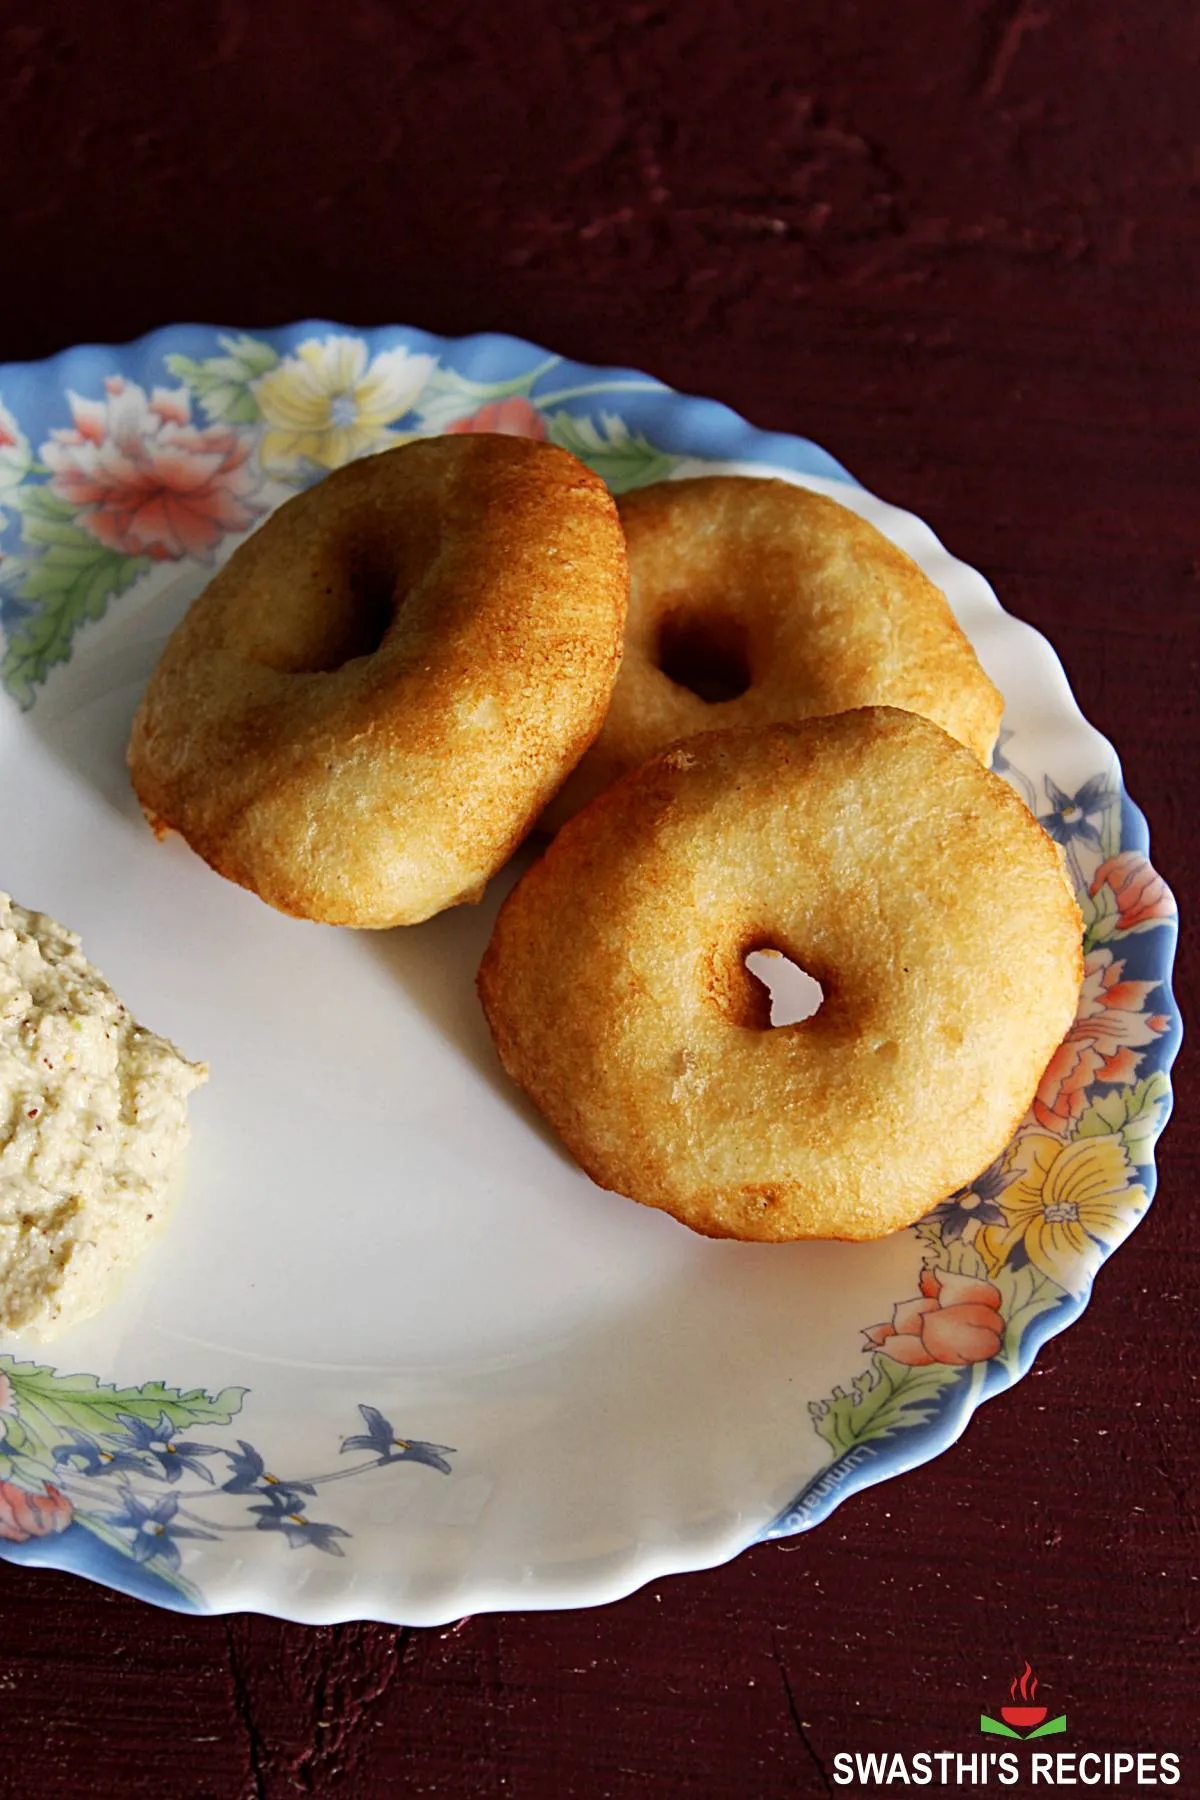 medu vada served with coconut chutney in a white plate